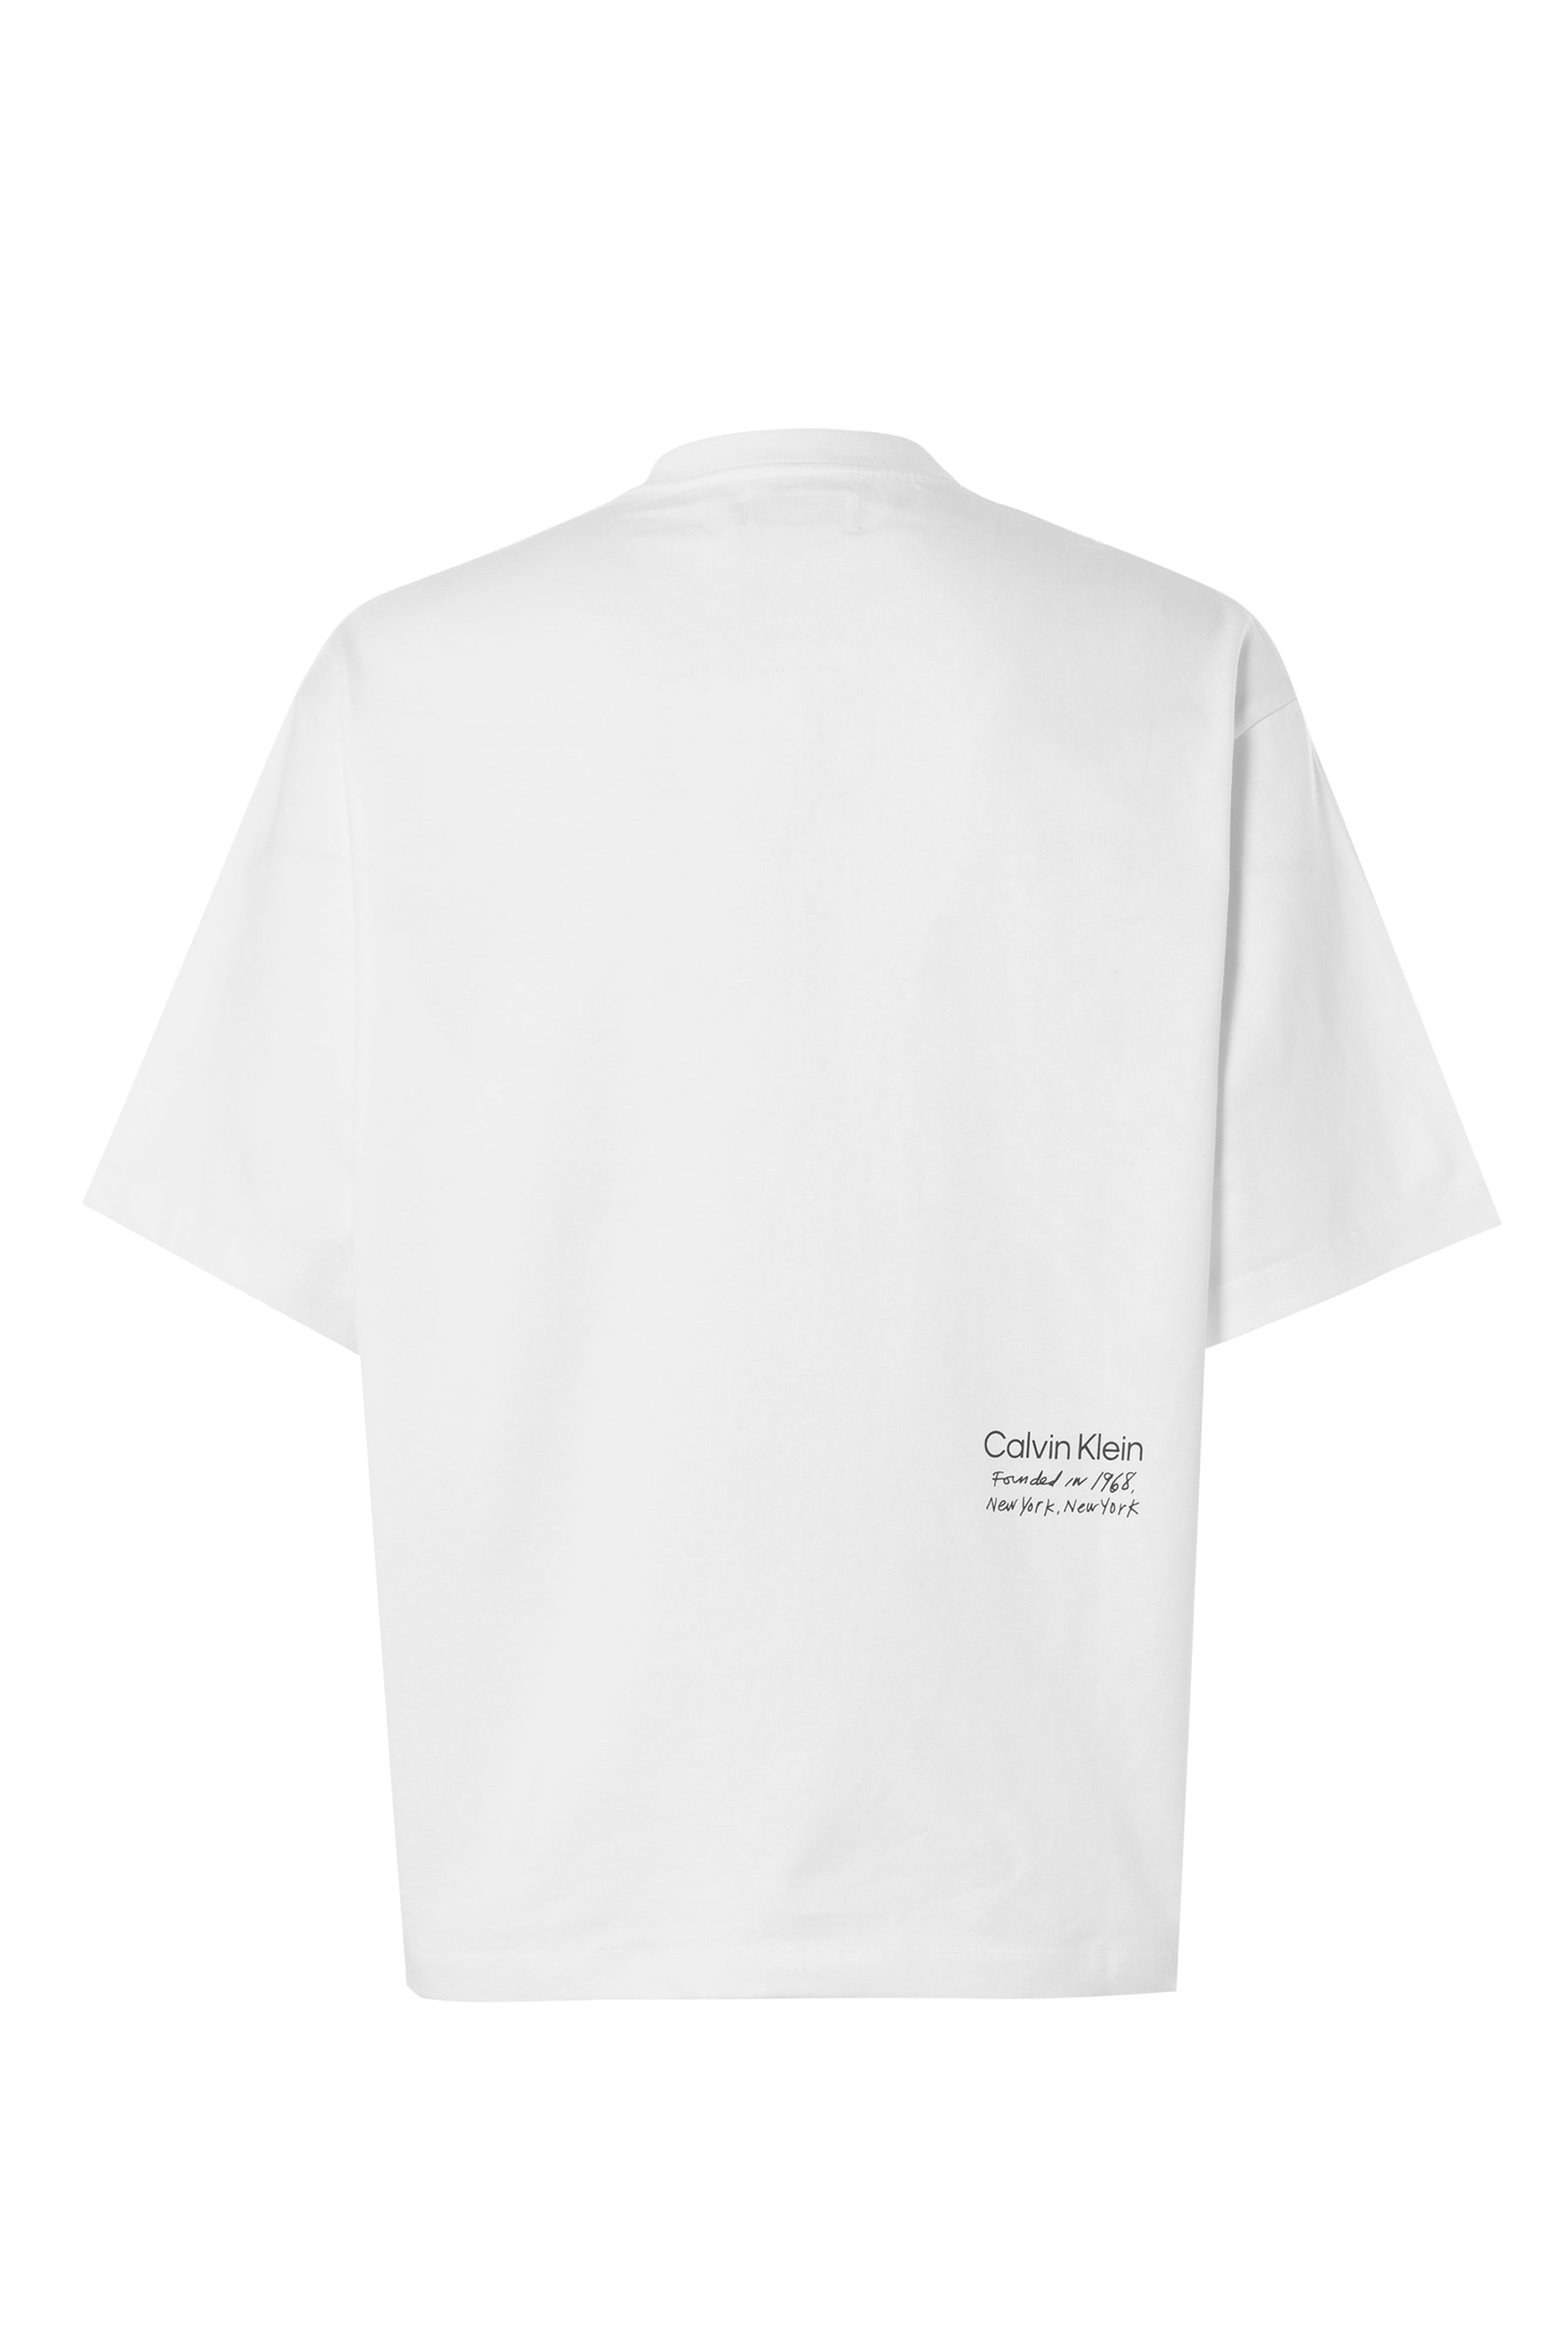 Calvin Klein Jeans SS23 SS COMPACT JERSEY TEE / WHT - NUBIAN